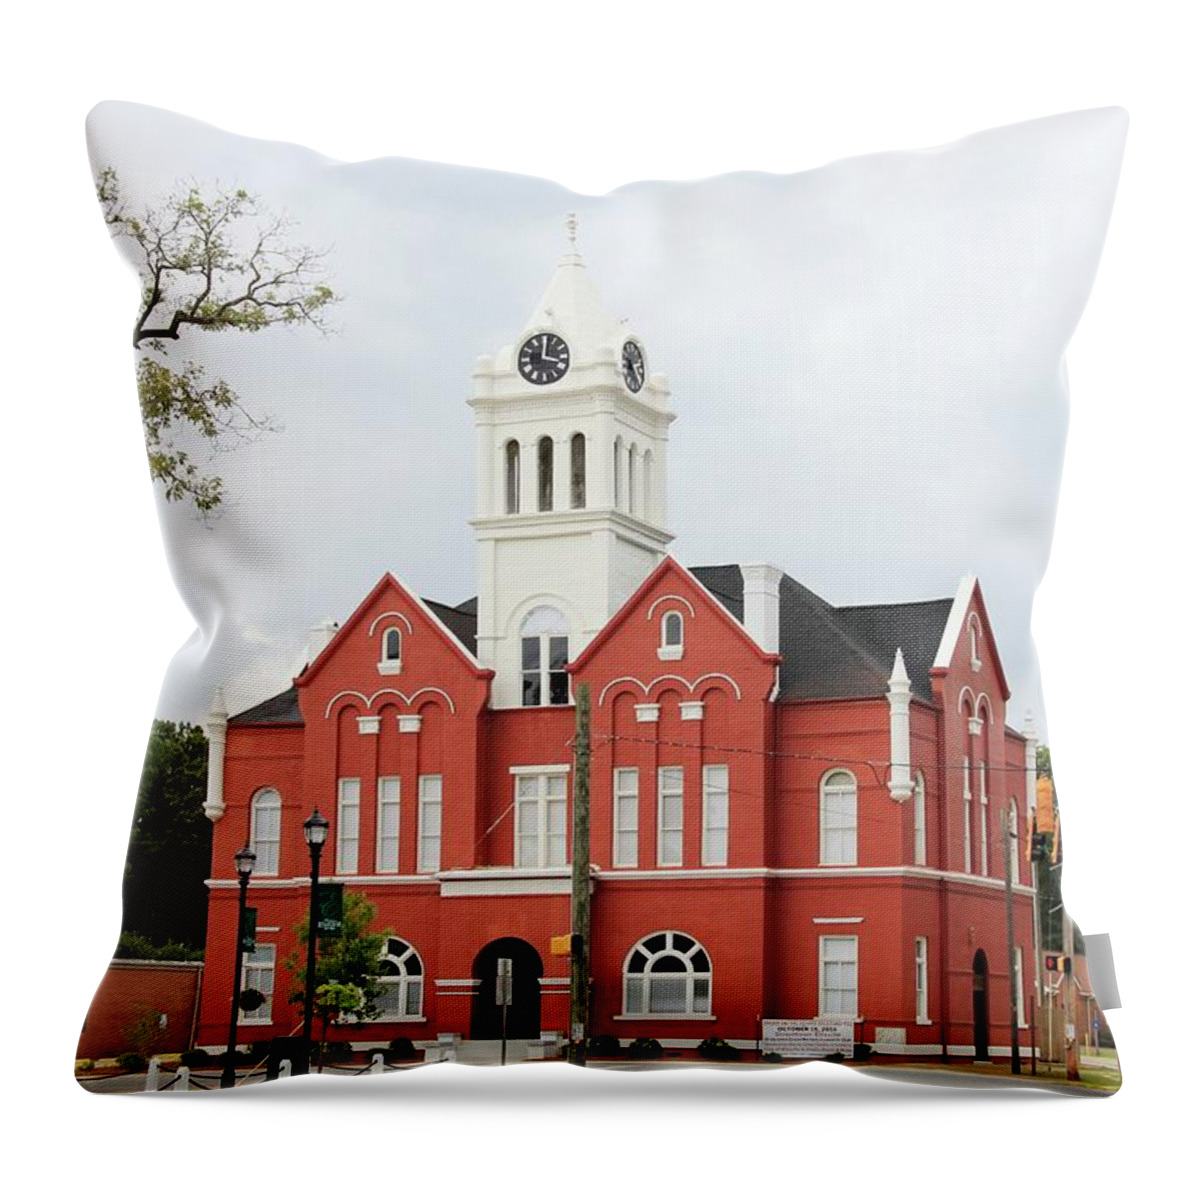 Schley Courthouse Ellaville Schley Ellaville Courthouse Stores Square Caylee Hammock Brent Cobb Throw Pillow featuring the photograph Schley County Courthouse 2 by Jerry Battle